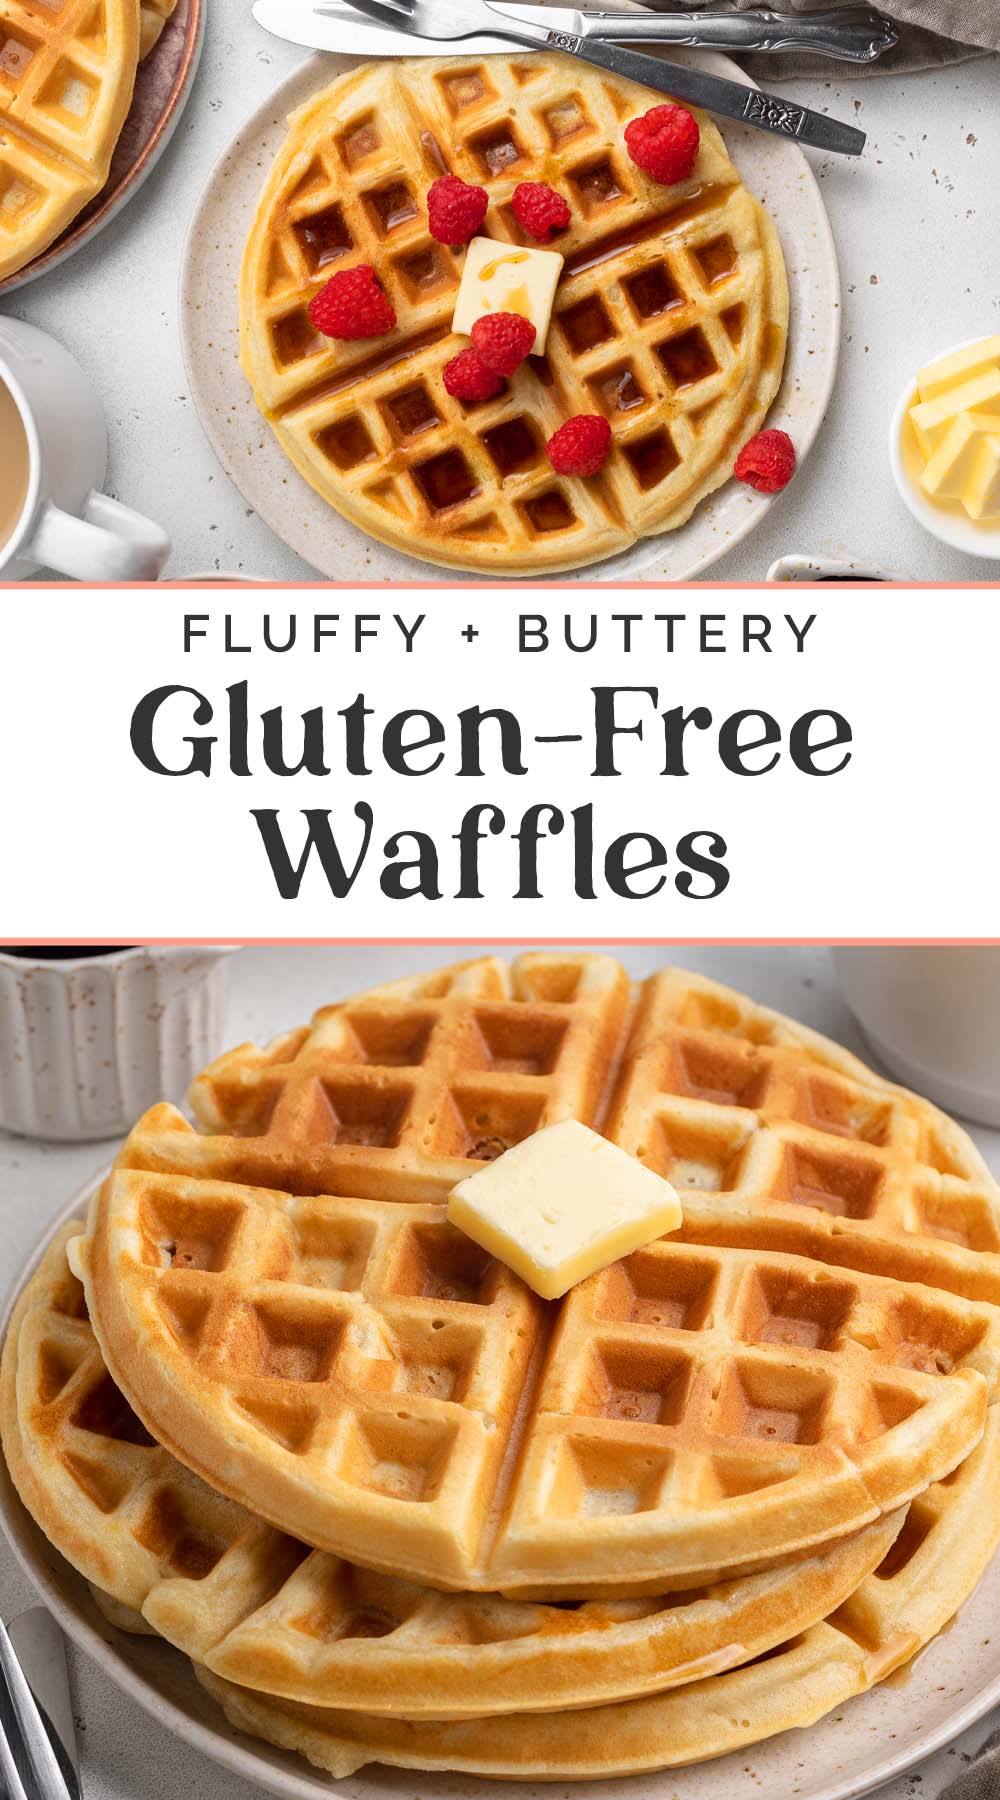 Pin graphic for gluten-free waffles.